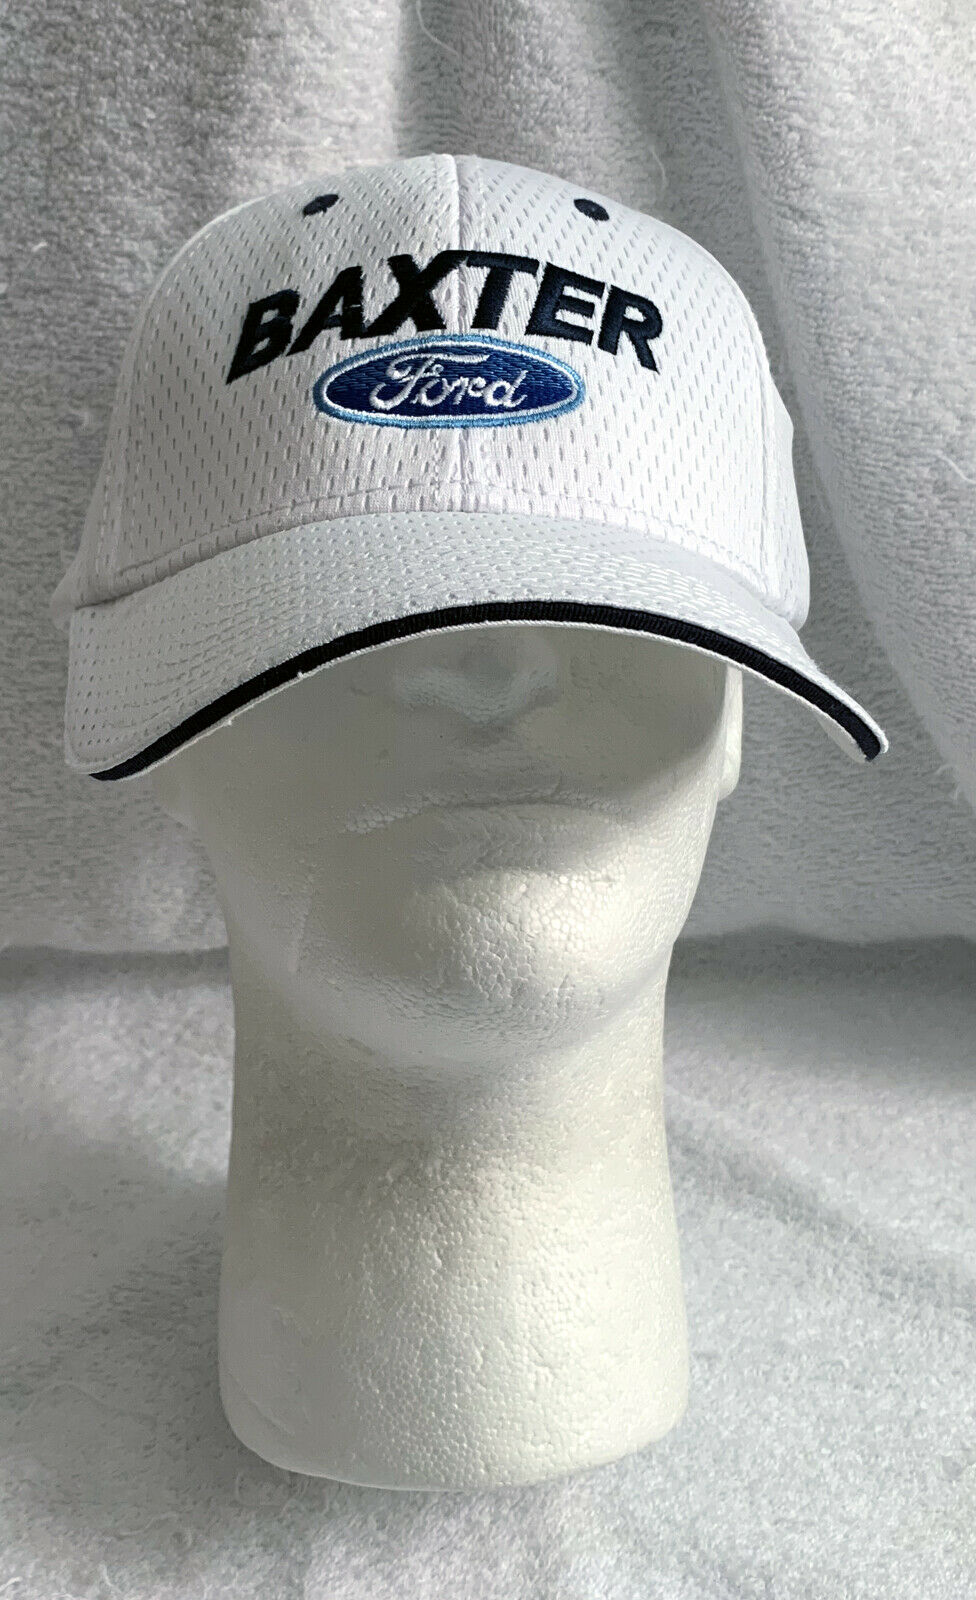 Primary image for Baxter Ford Baseball Hat Mens White Embroidered Polyester Hook & Look Strap